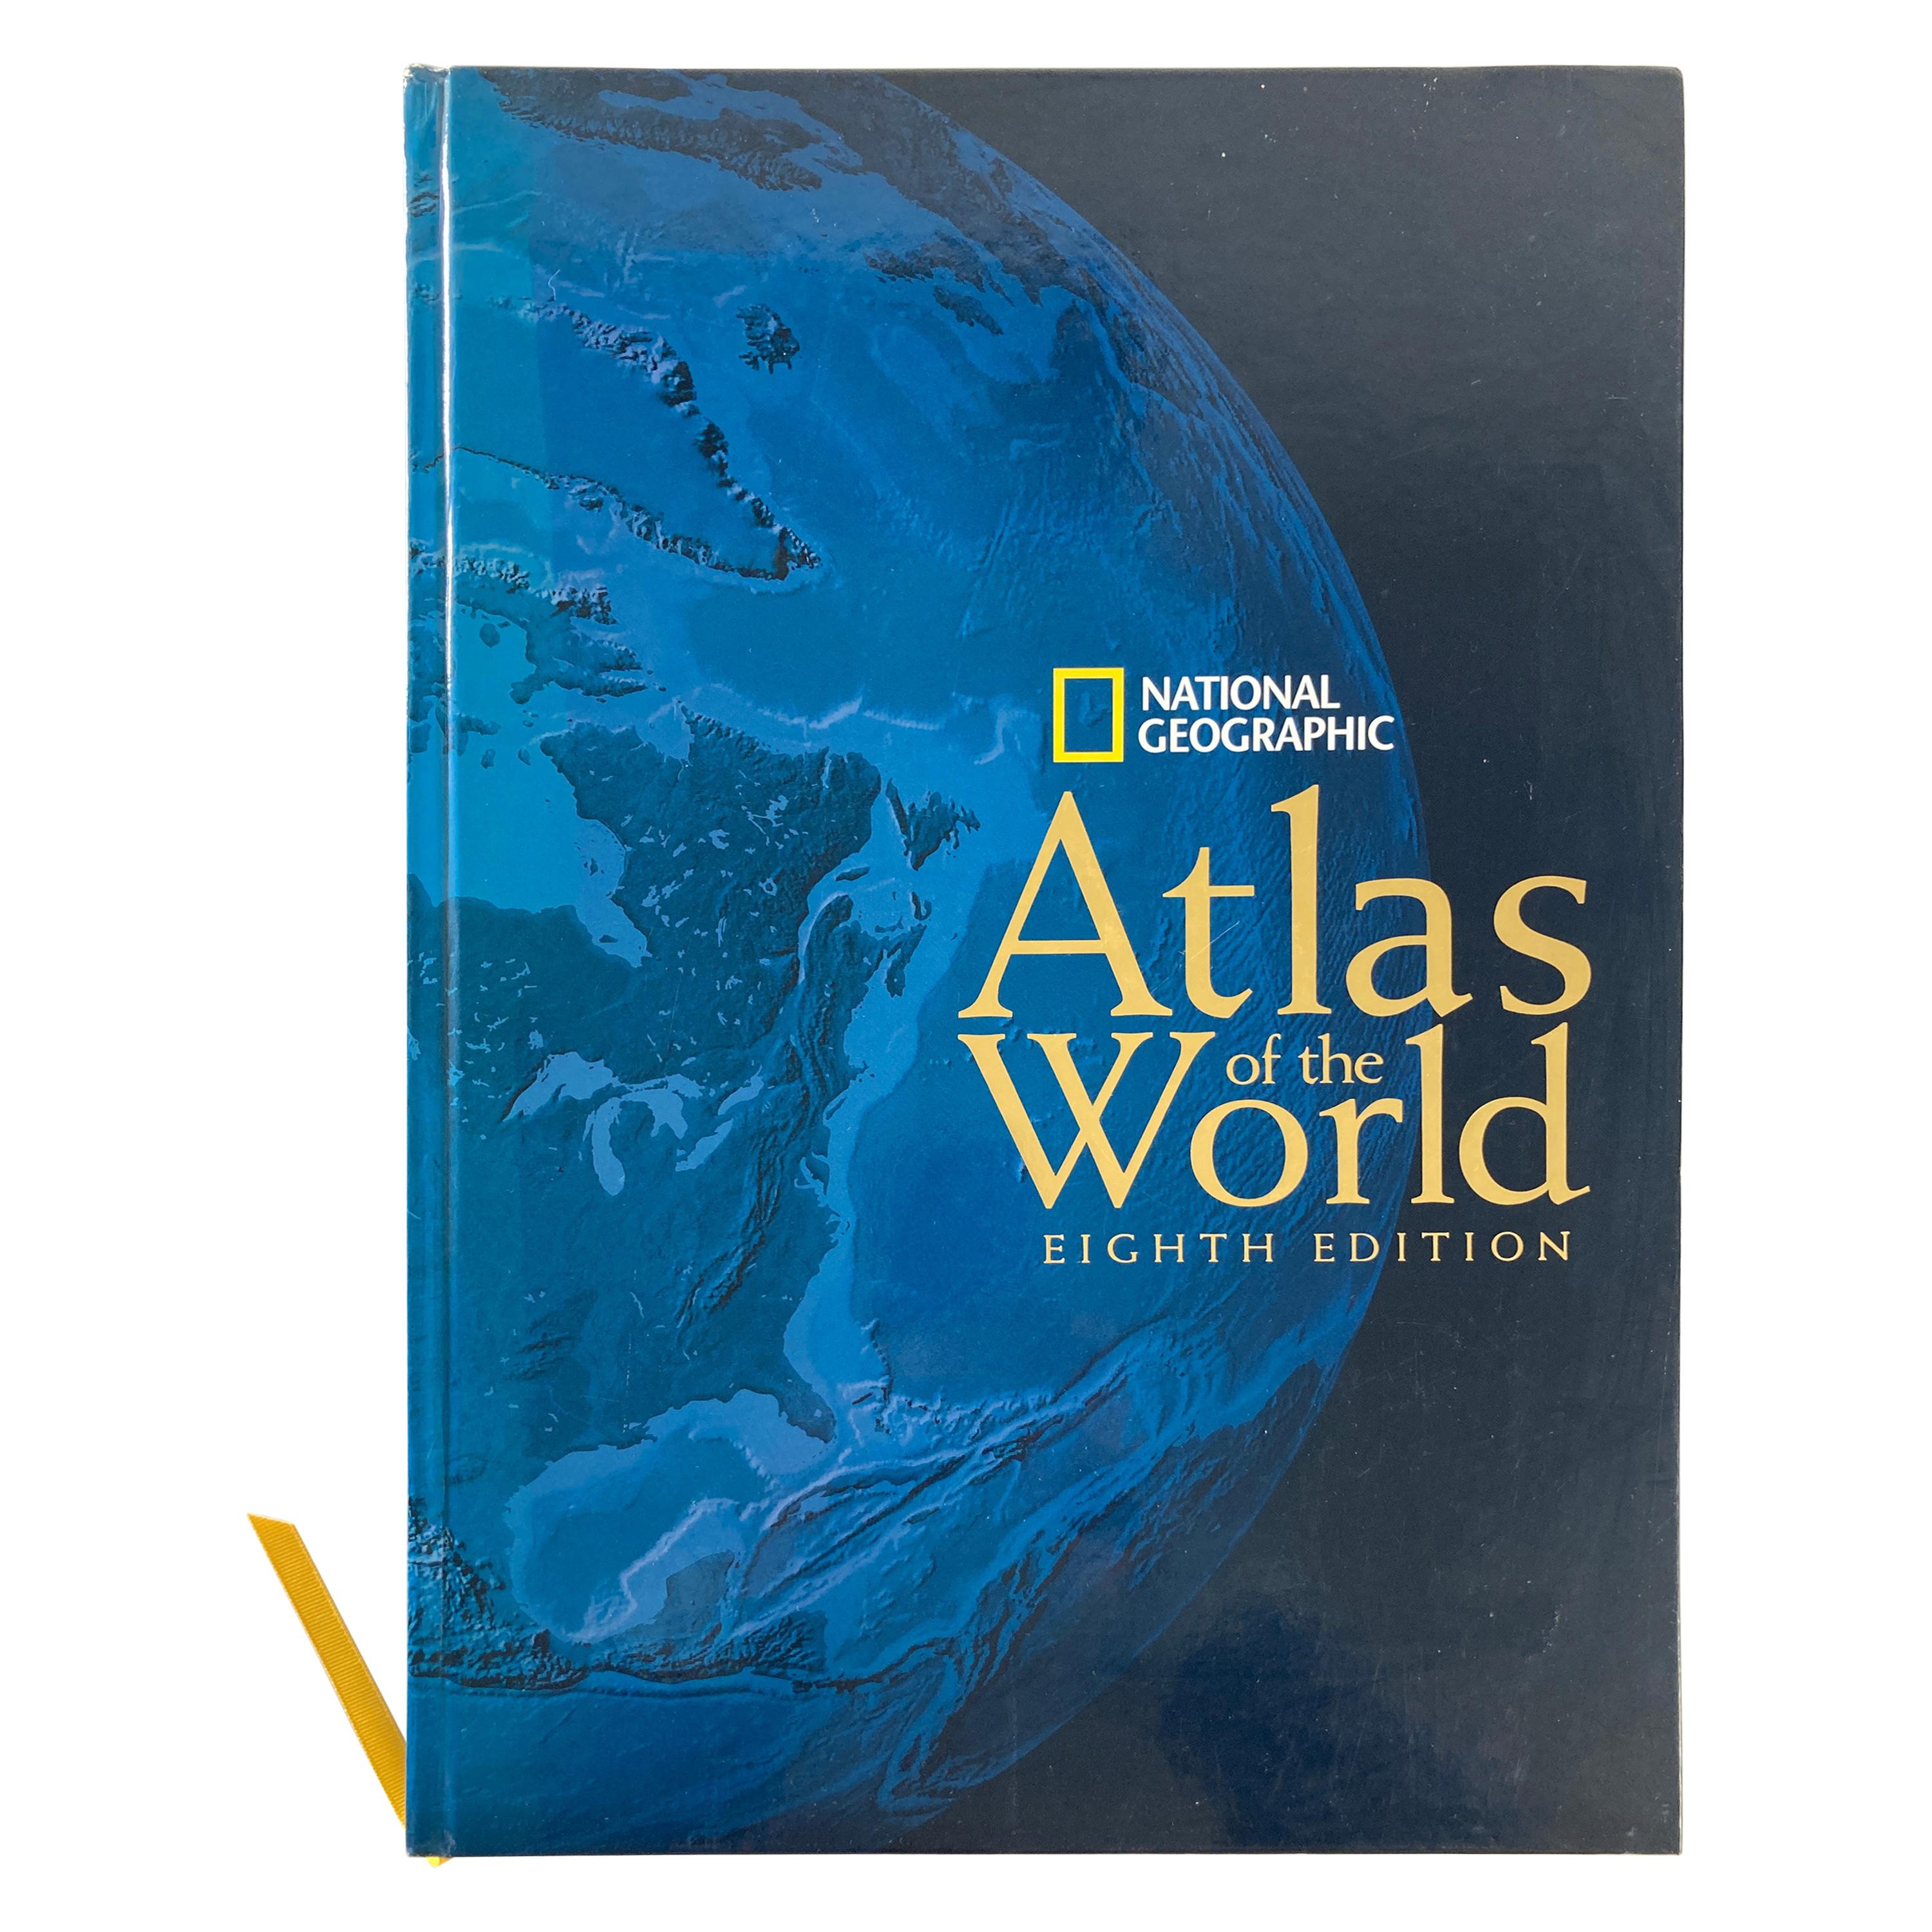 National Geographic Atlas of the World, Eighth Edition Hardcover Book